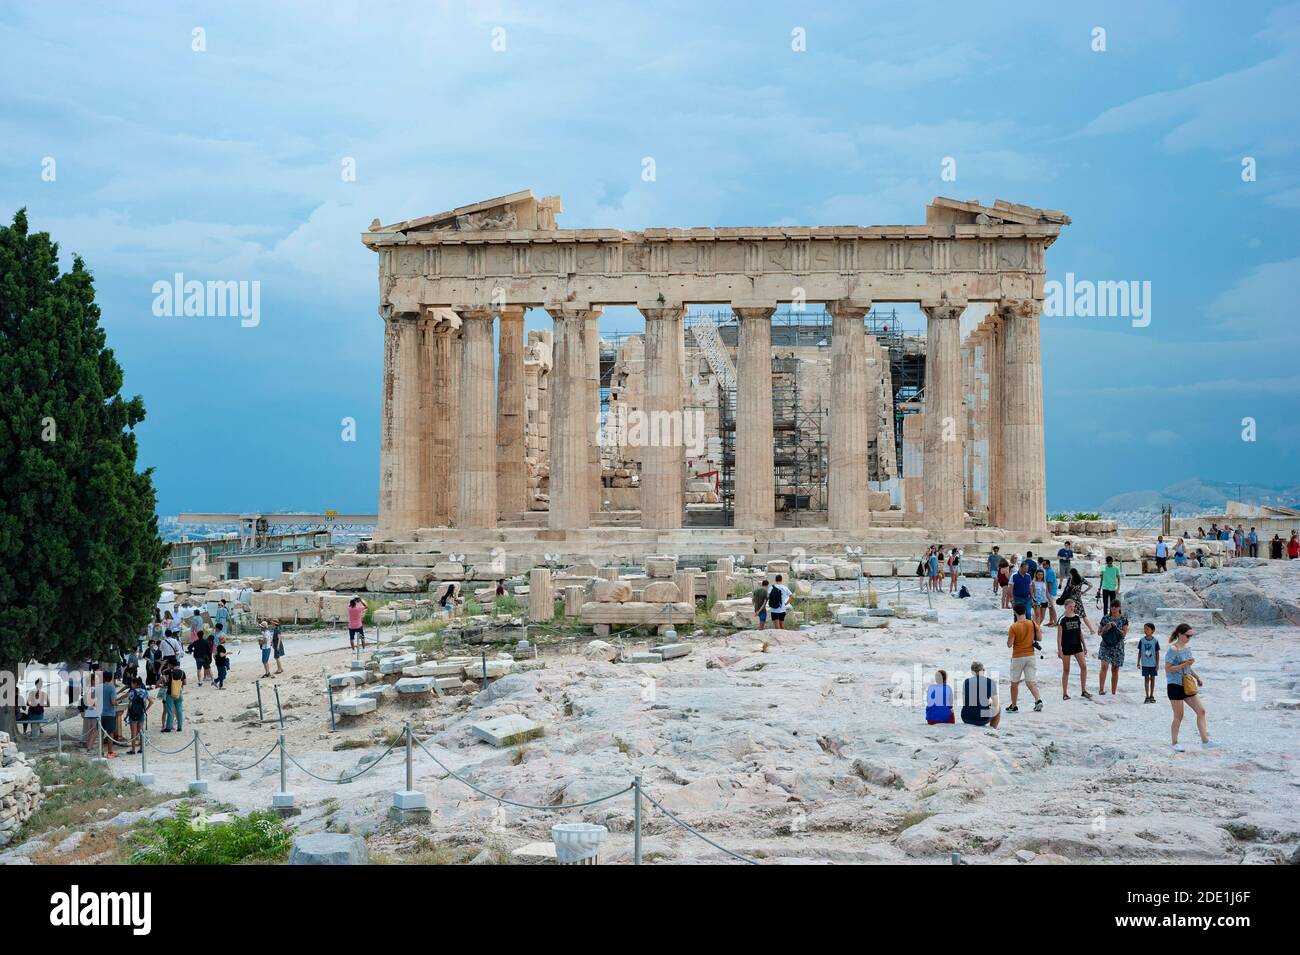 Parthenon temple against stormy sky background and a group of tourists in front of it, Athens, Greece Stock Photo